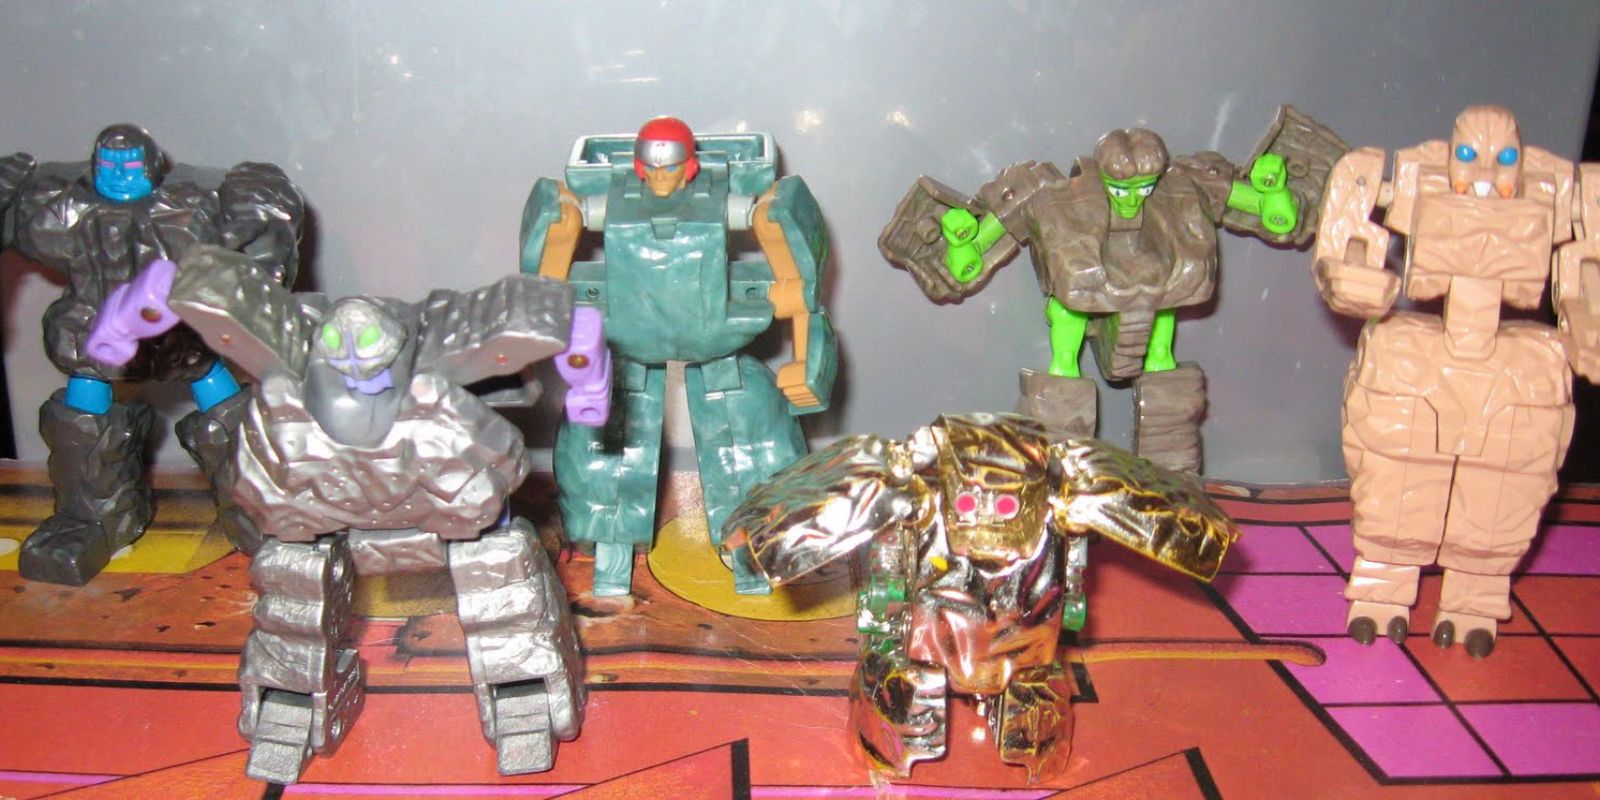 Toys of Granite, Crackpot, Boulder, Nuggit, Marbles, and Pulver-Eyes from Rock Lords